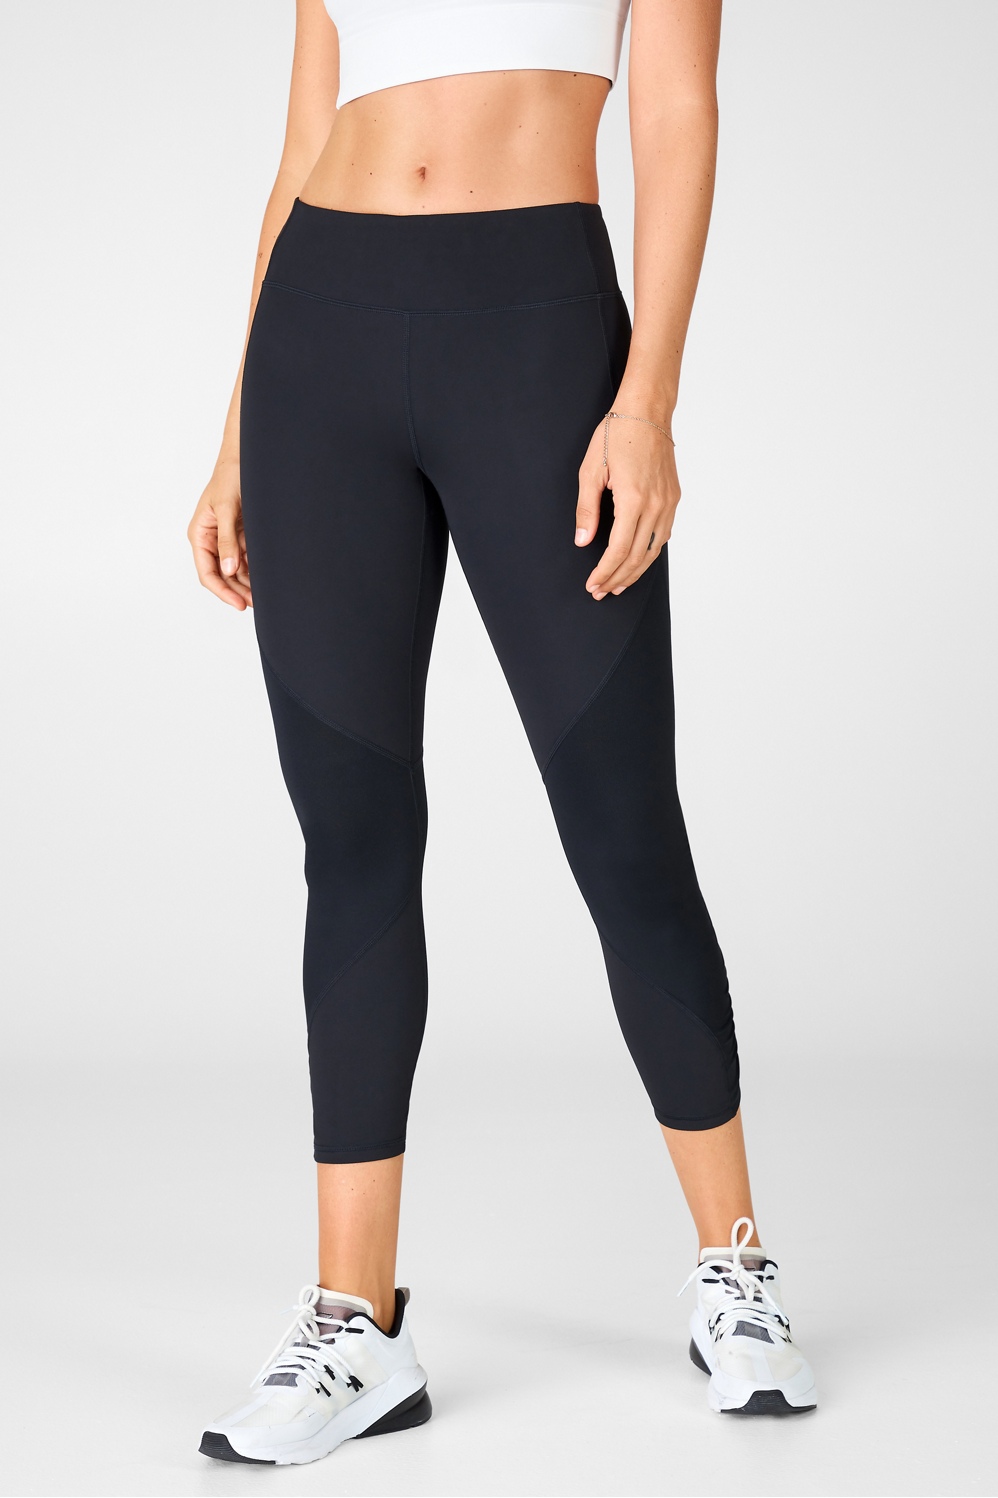 PureLuxe Mid-Rise Ruched 7/8 Legging